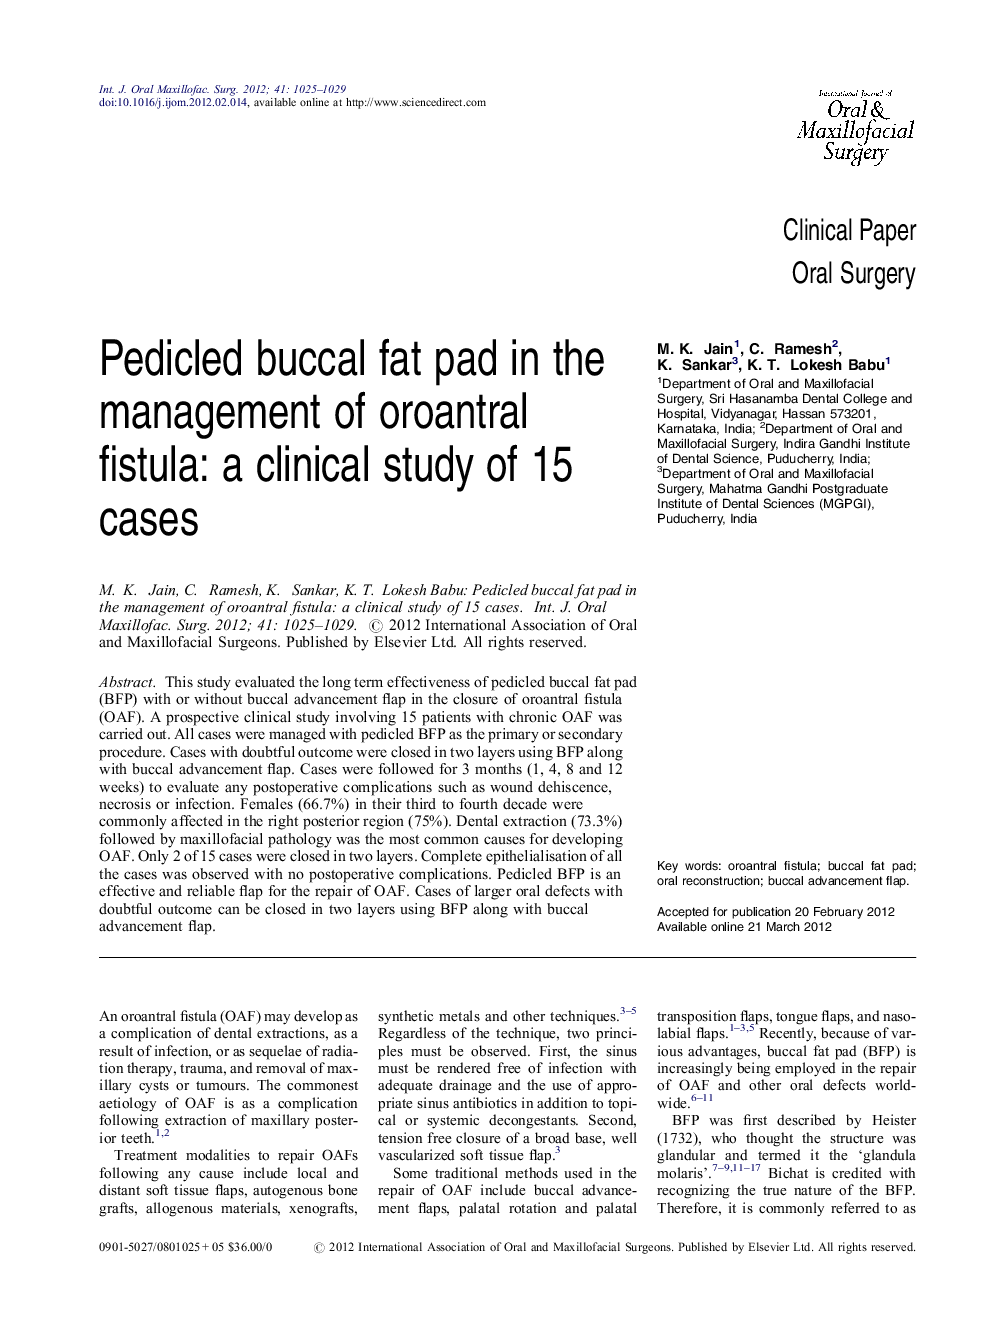 Pedicled buccal fat pad in the management of oroantral fistula: a clinical study of 15 cases